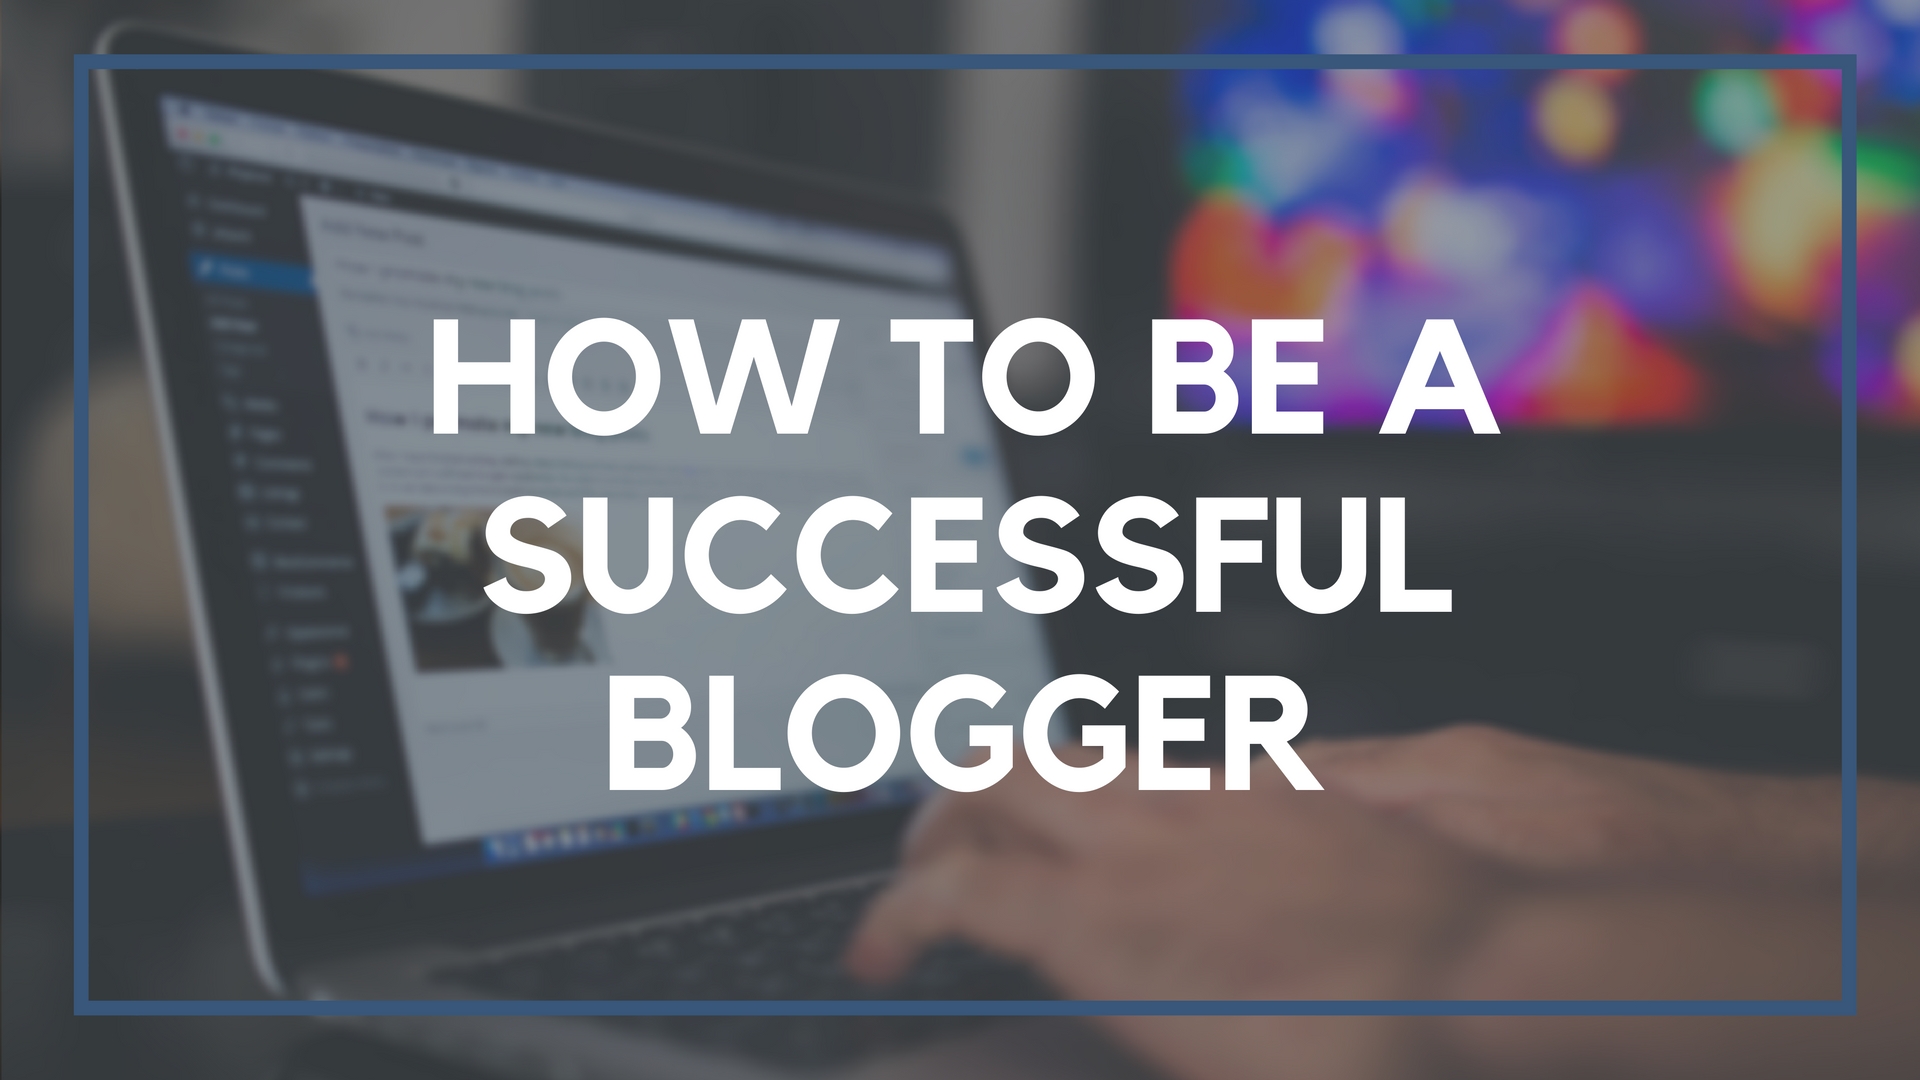 How to Be a Successful Blogger - Business 2 Community